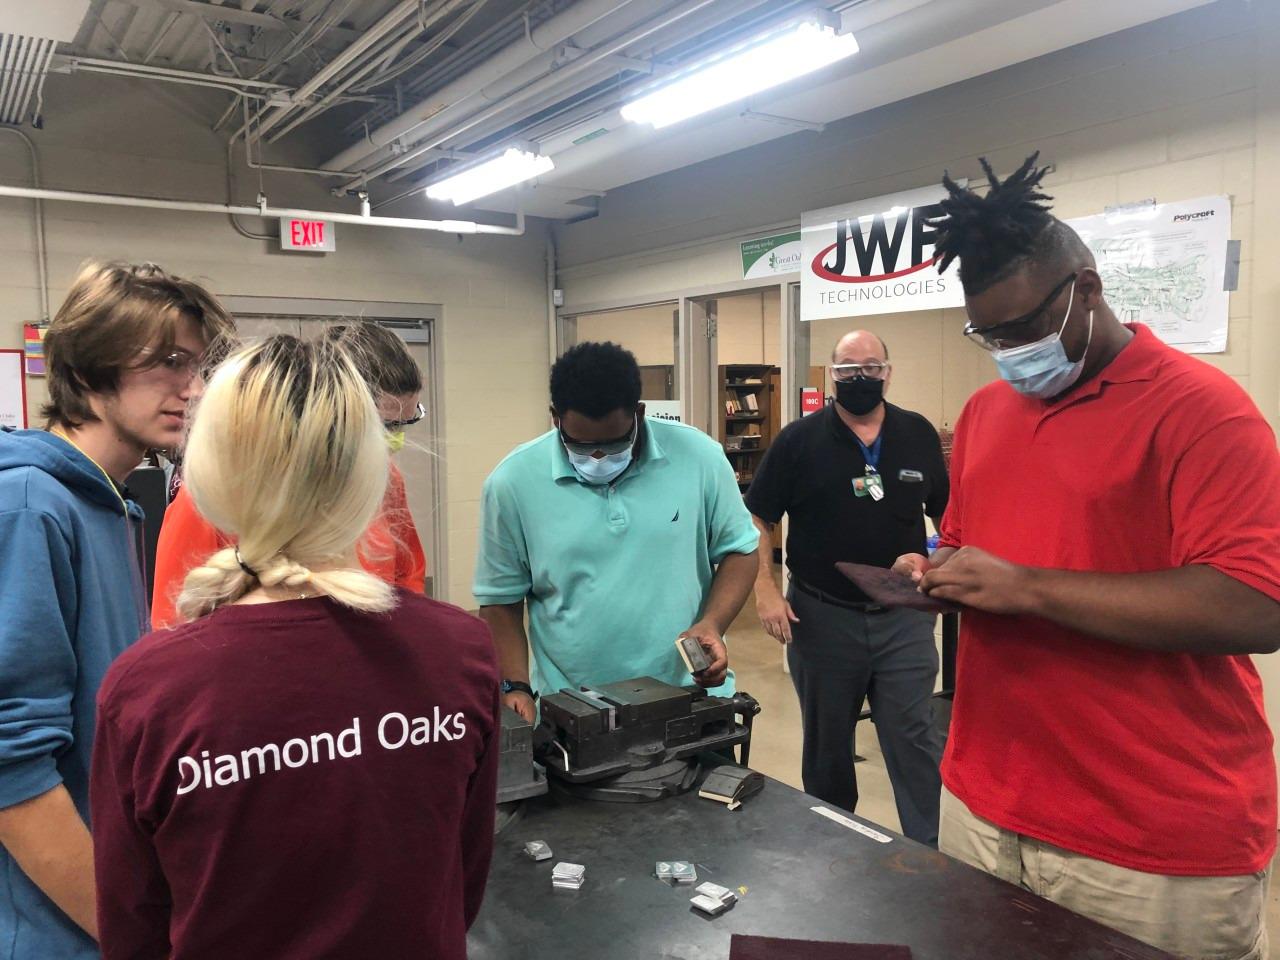 We are Diamond Oaks! The first choice in providing innovative career training to empower individuals and communities. Start your FUTURE today - Call: (513) 574-1300